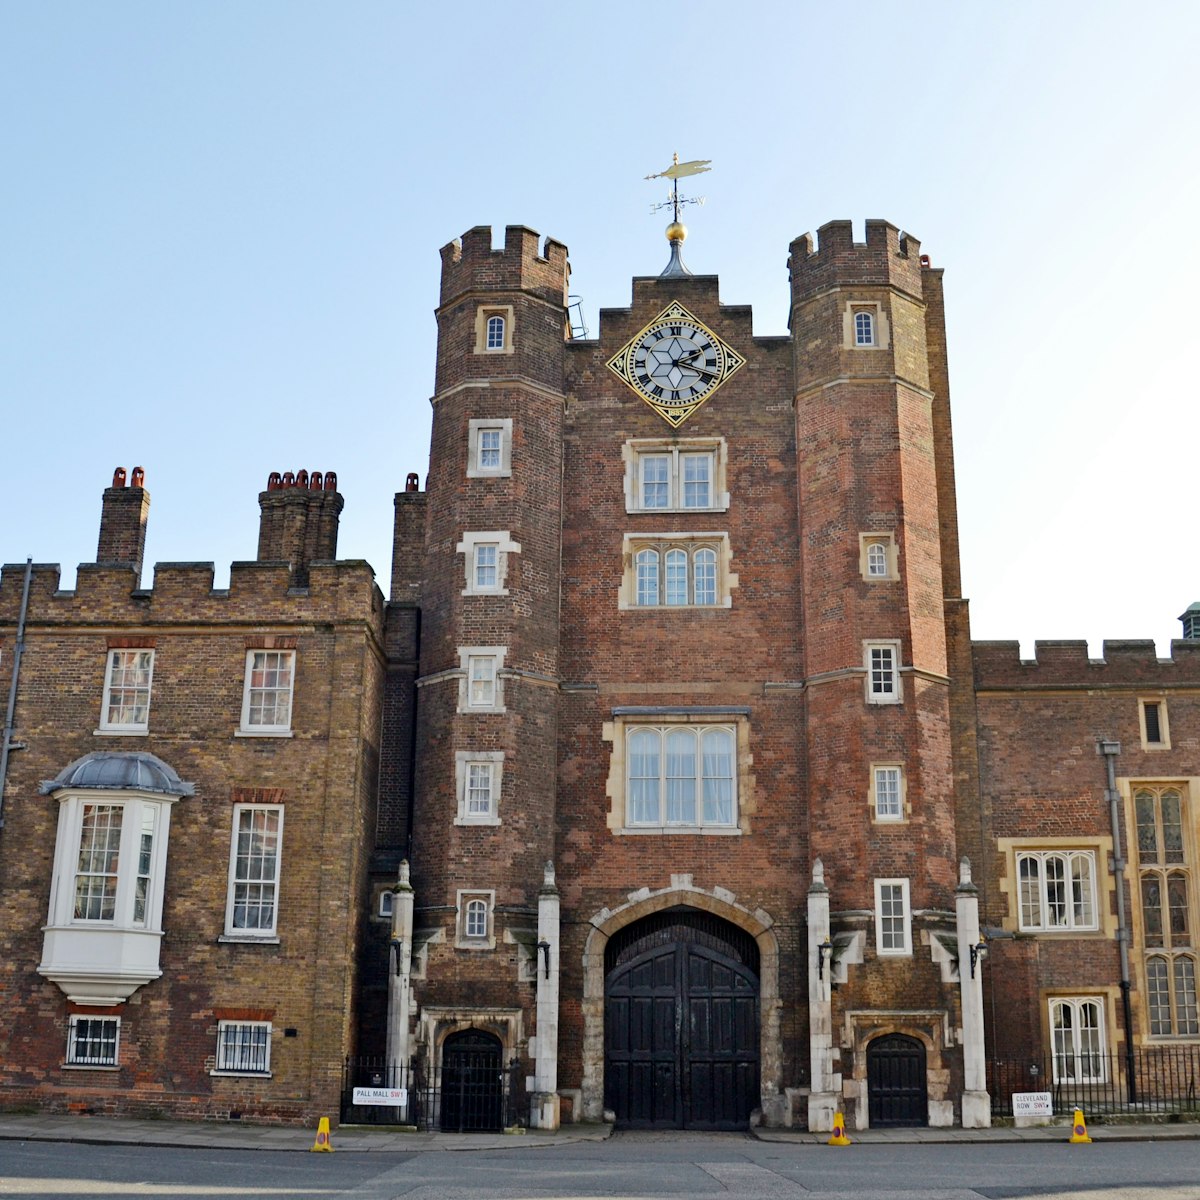 St James's Palace was built by Henry VIII in 1530, and this stunning gatehouse is the only part still intact